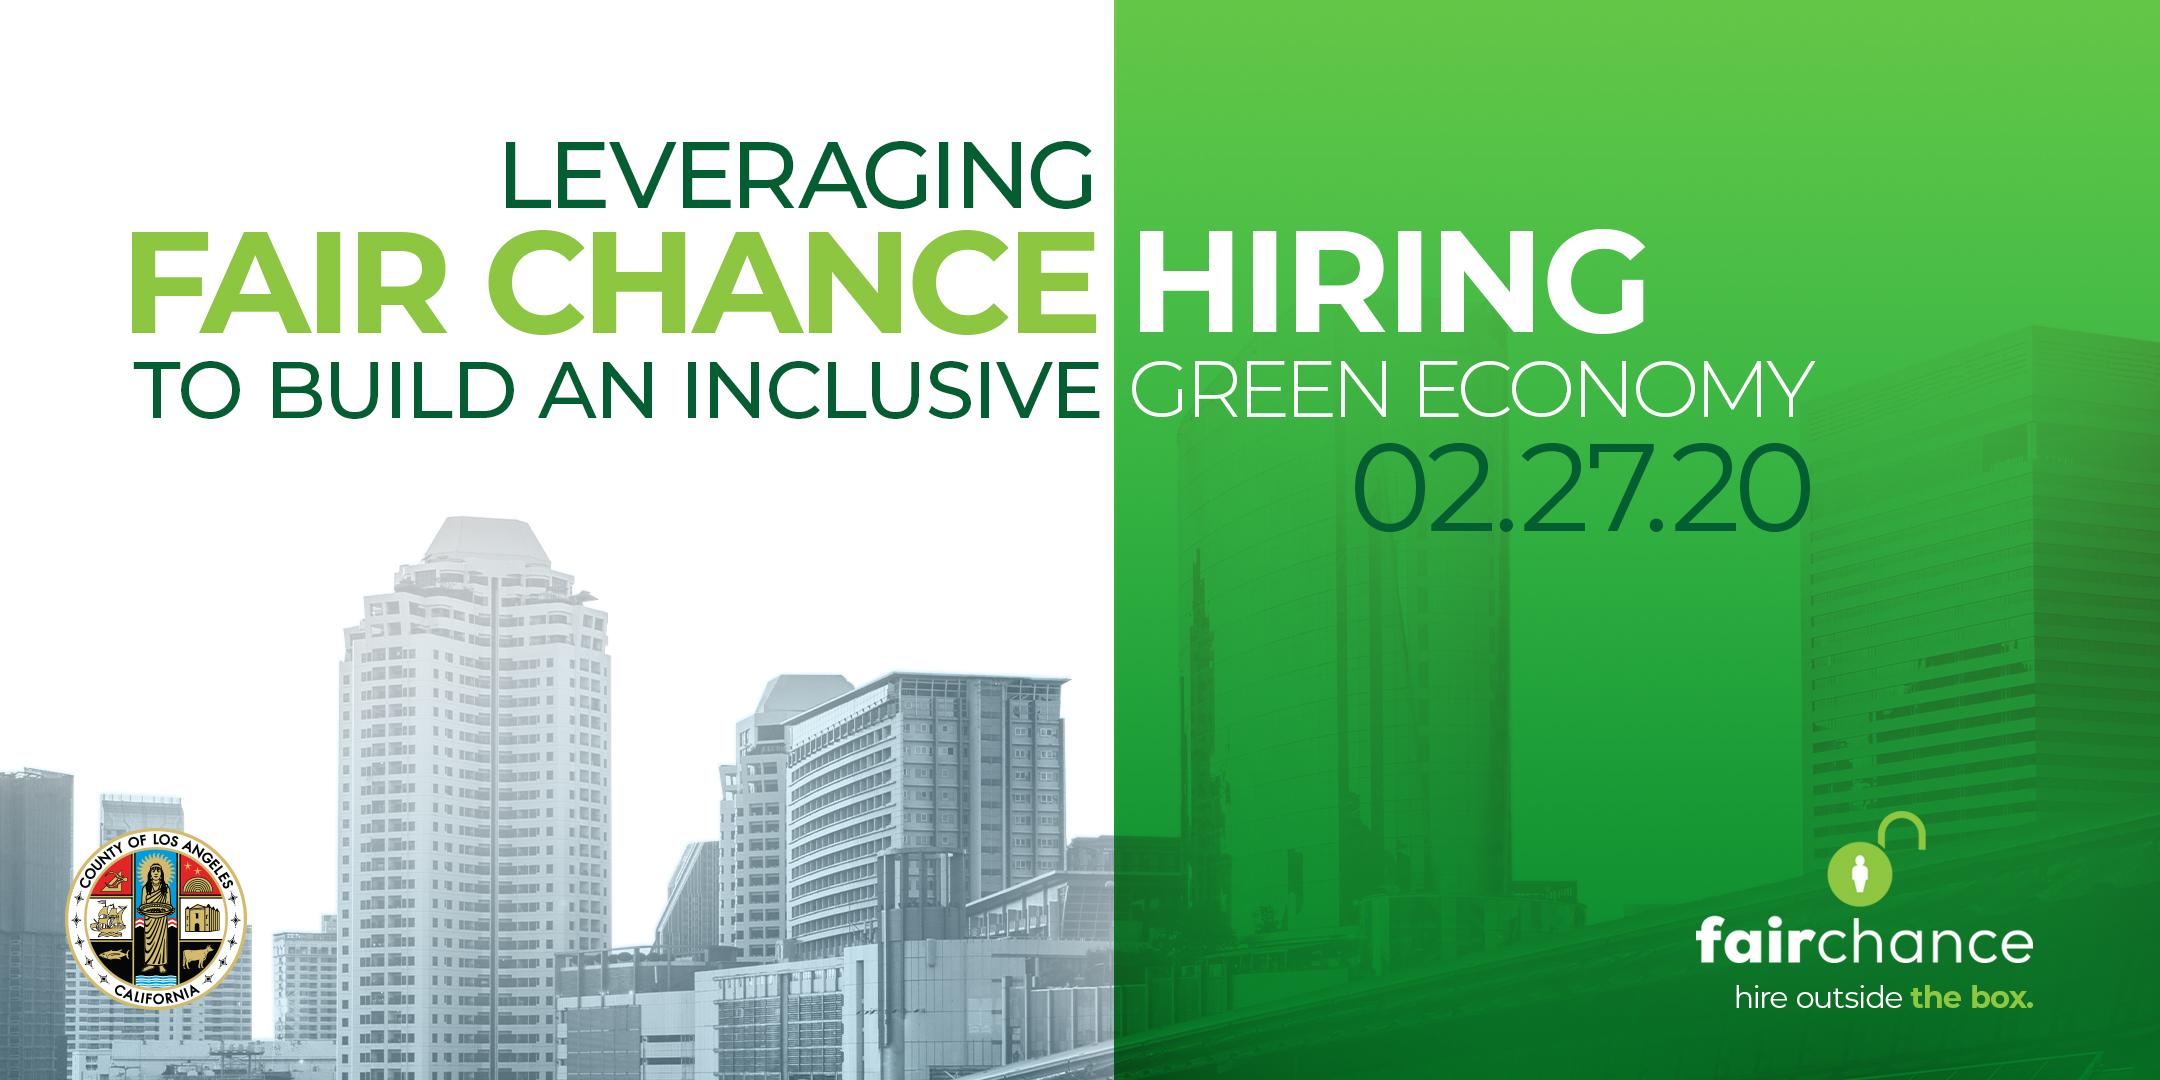 Leveraging Fair Chance Hiring to Build an Inclusive Green Economy